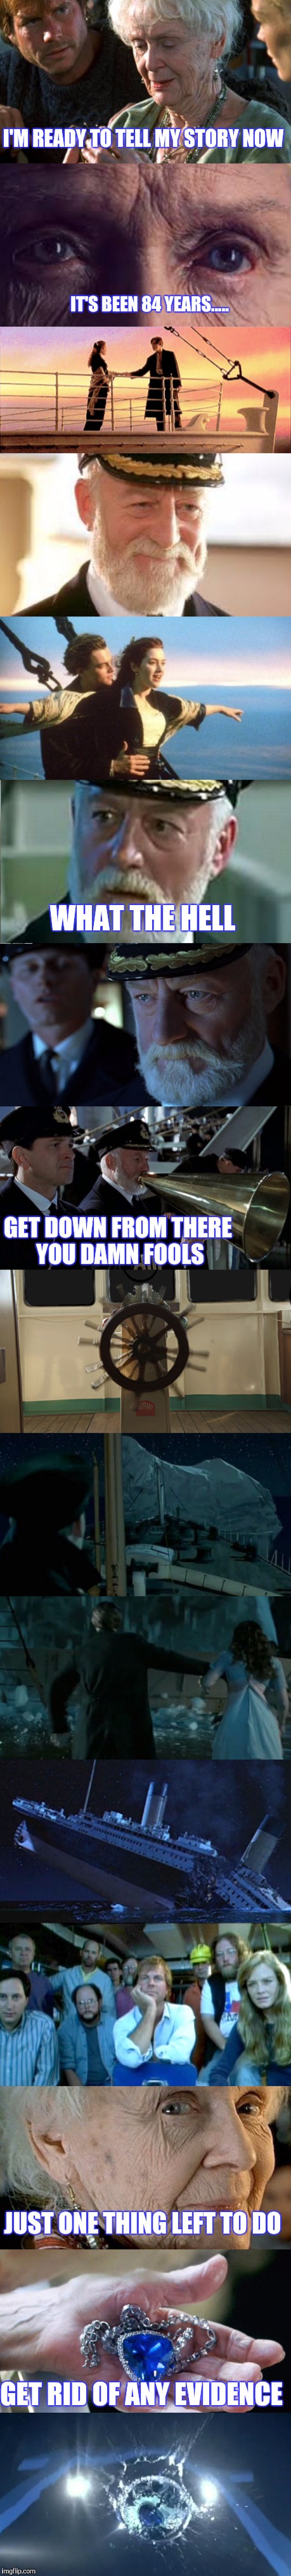 ONLYROSEKNOWS | I'M READY TO TELL MY STORY NOW; IT'S BEEN 84 YEARS..... WHAT THE HELL; GET DOWN FROM THERE YOU DAMN FOOLS; JUST ONE THING LEFT TO DO; GET RID OF ANY EVIDENCE | image tagged in titanic,funny | made w/ Imgflip meme maker